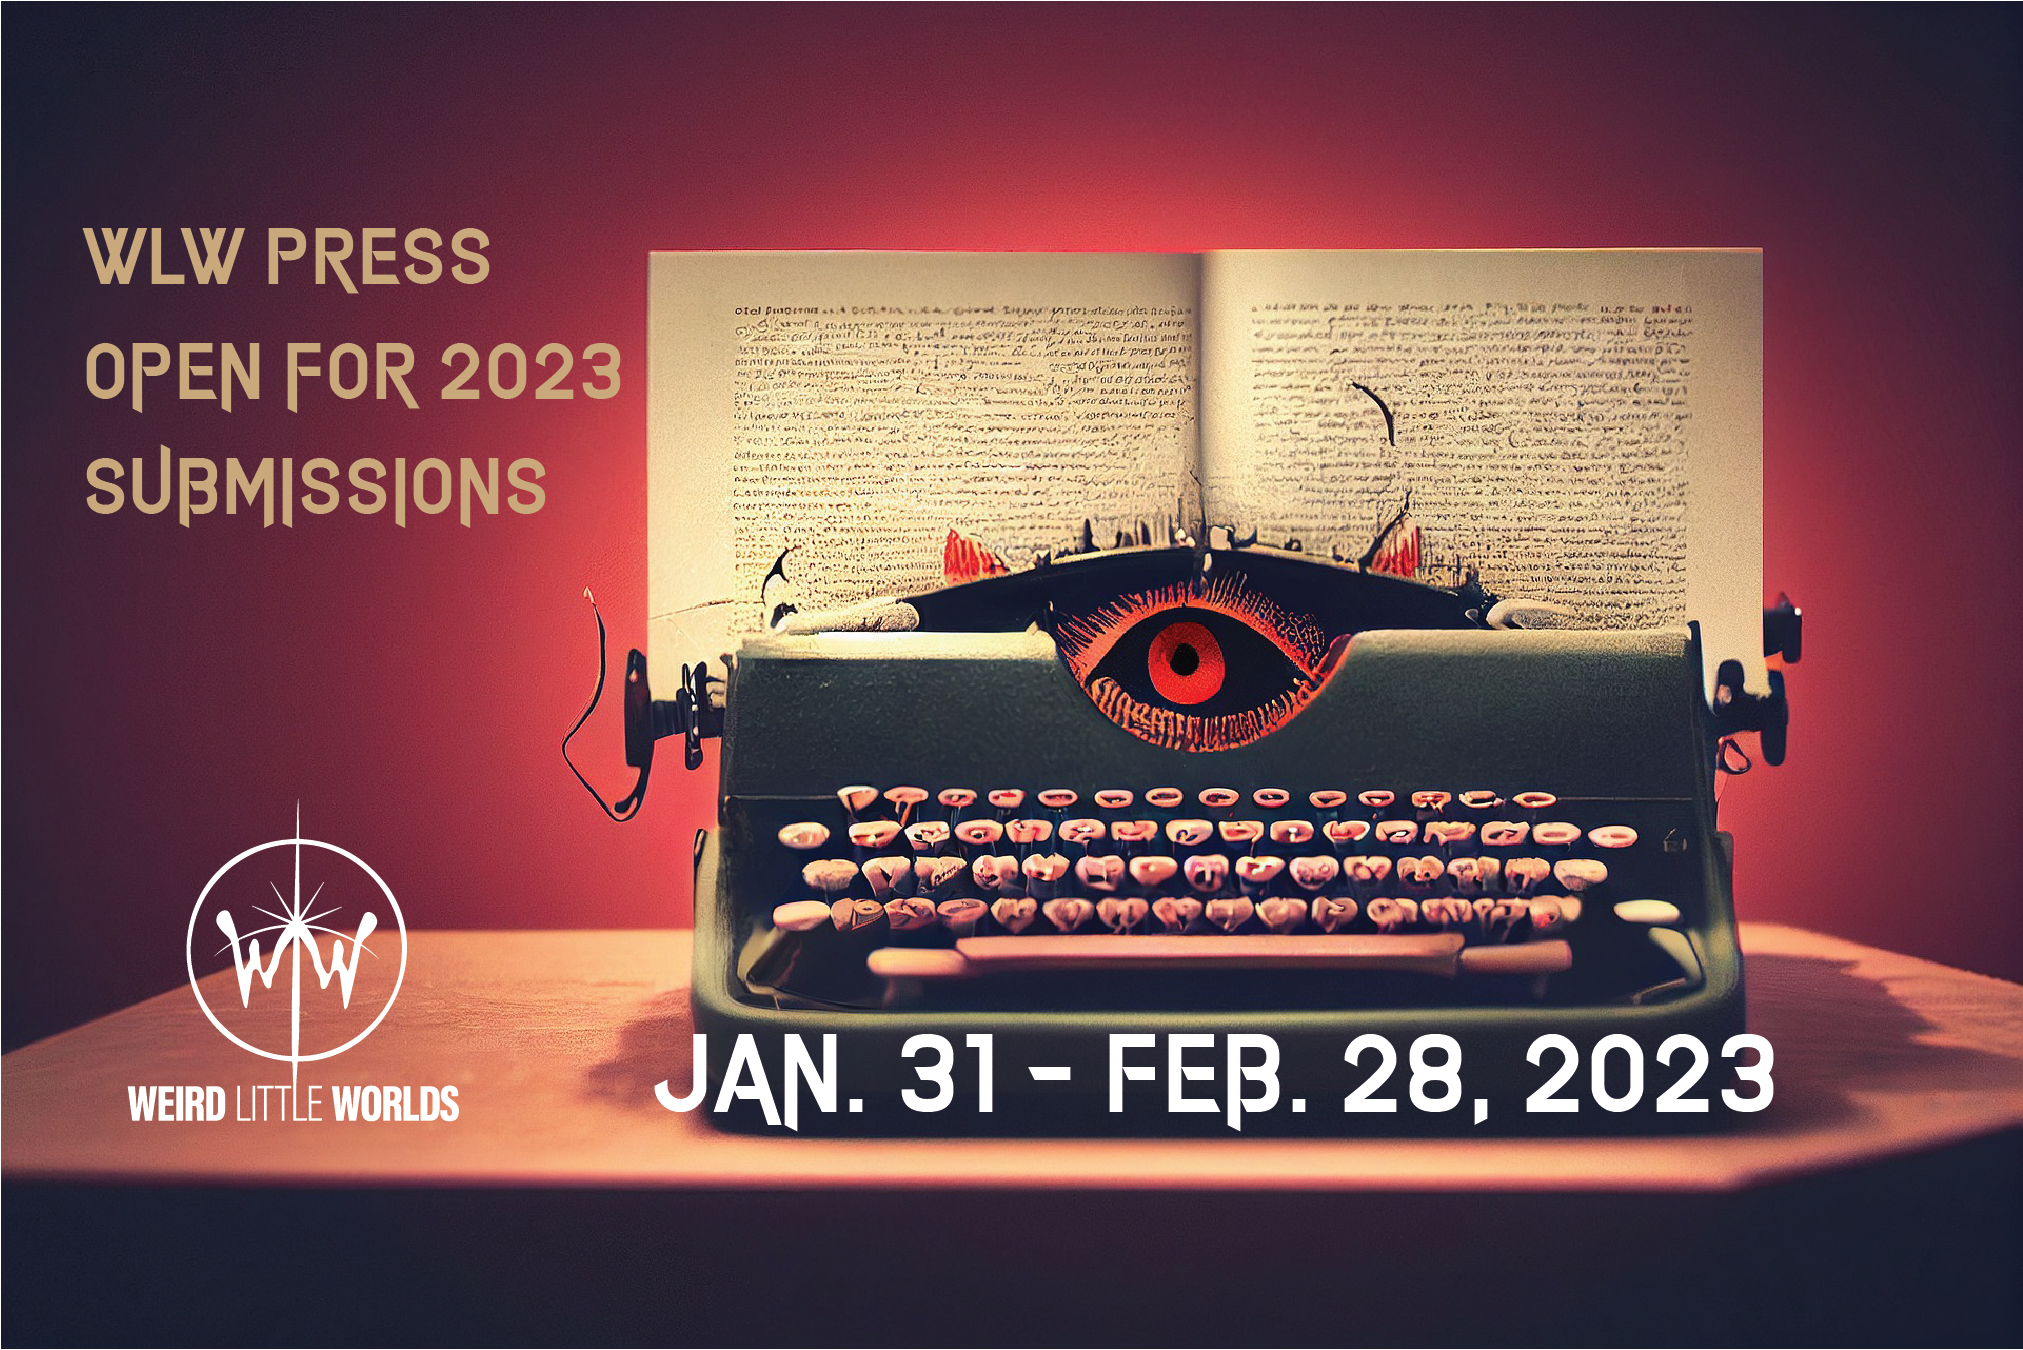 Weird Little Worlds Press open for Submissions Jan. 31 - February 28, 2023